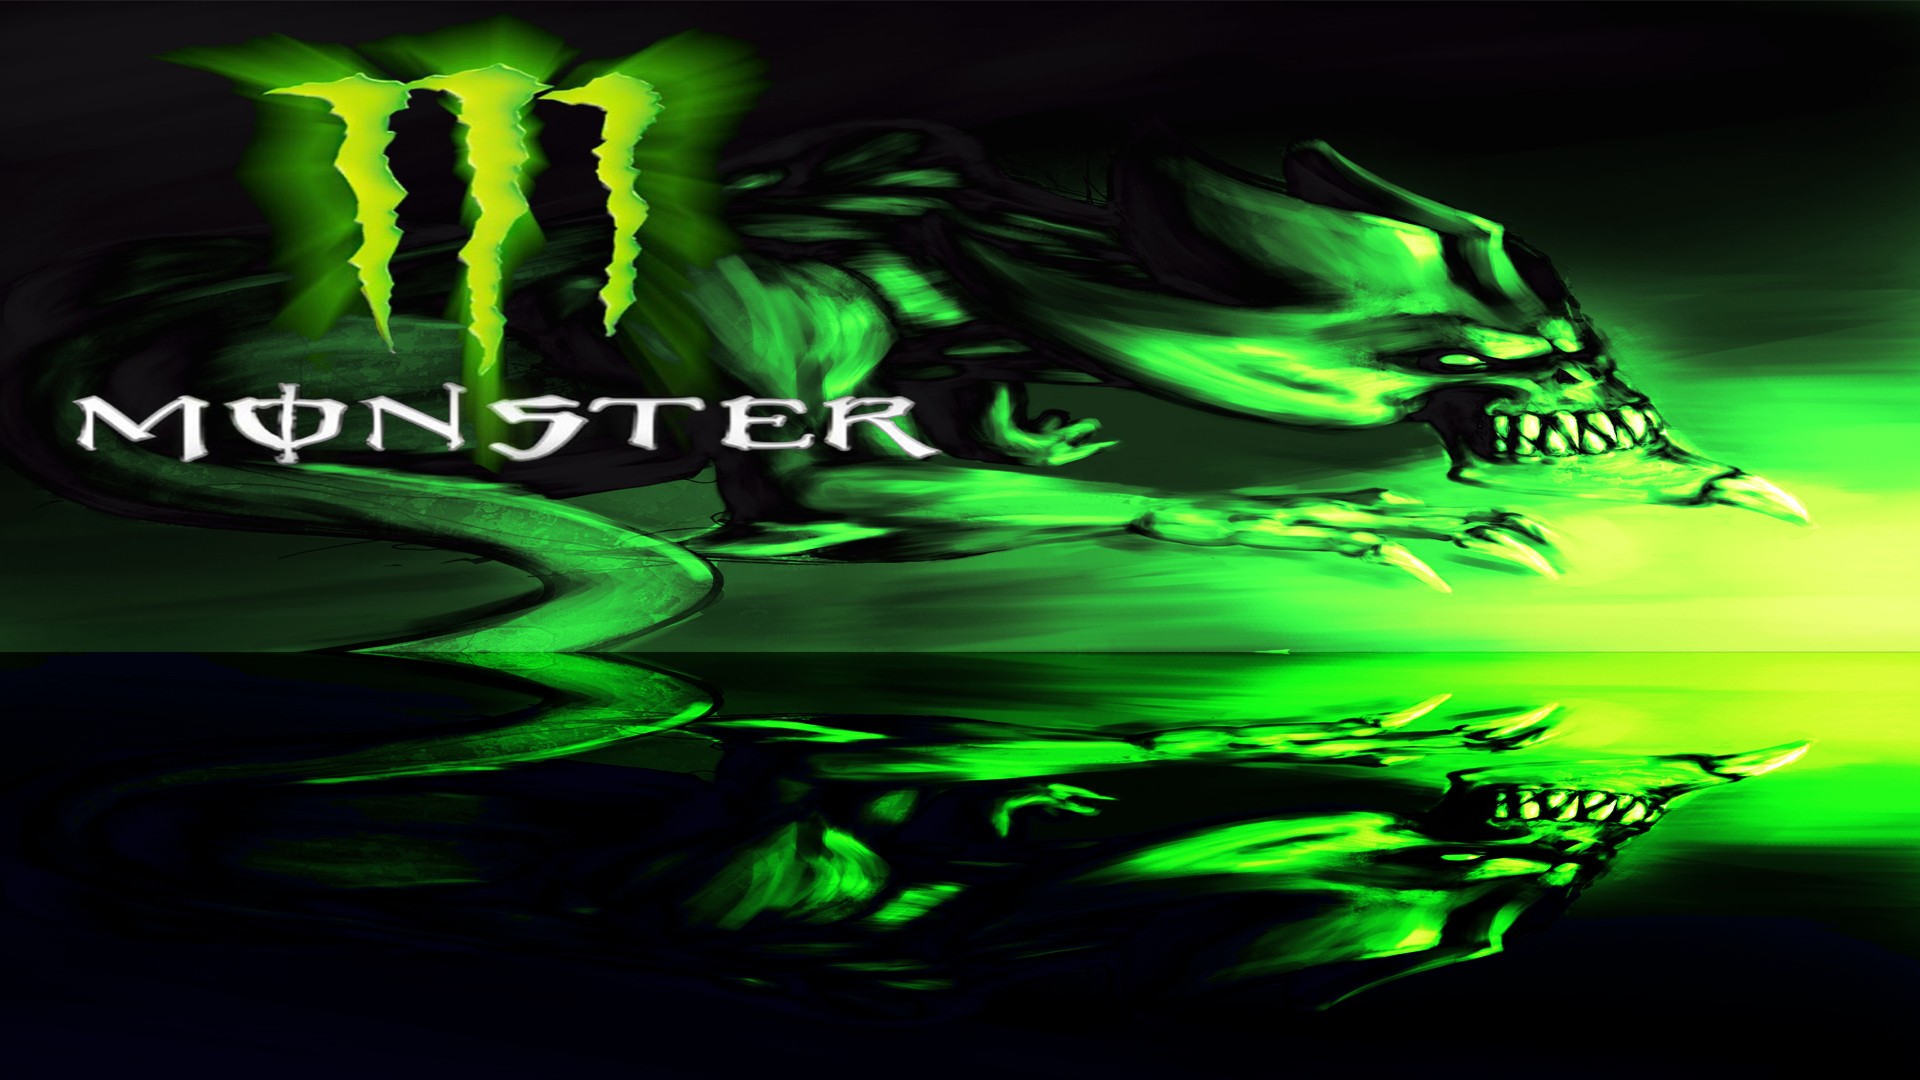 Free Download Monster Wallpapers For Android Monster Energy Wallpaper 19x1080 For Your Desktop Mobile Tablet Explore 49 Monster Energy Wallpaper For Android Best Phone Wallpaper Android Wallpapers Hd Wallpapers For Phones